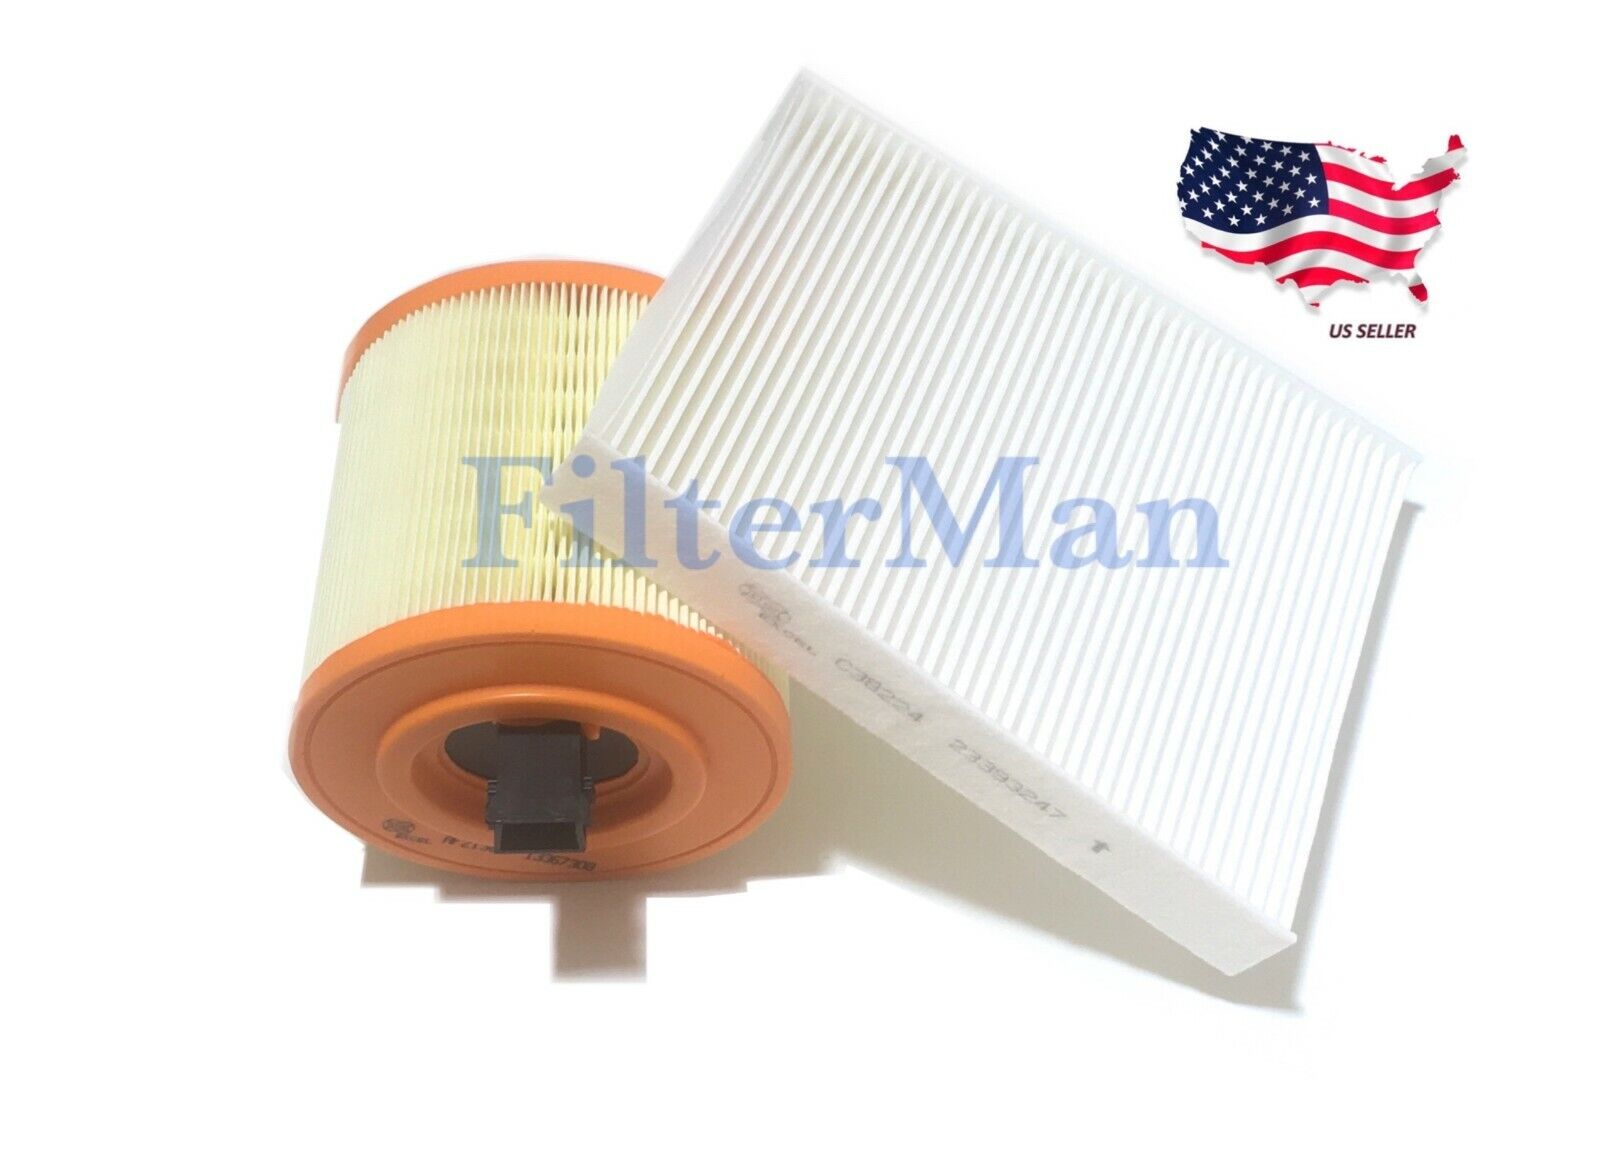 Engine & Cabin Air Filter for 2016-2019 Chevy Cruze 1.4 & Cadillac ATS V6 